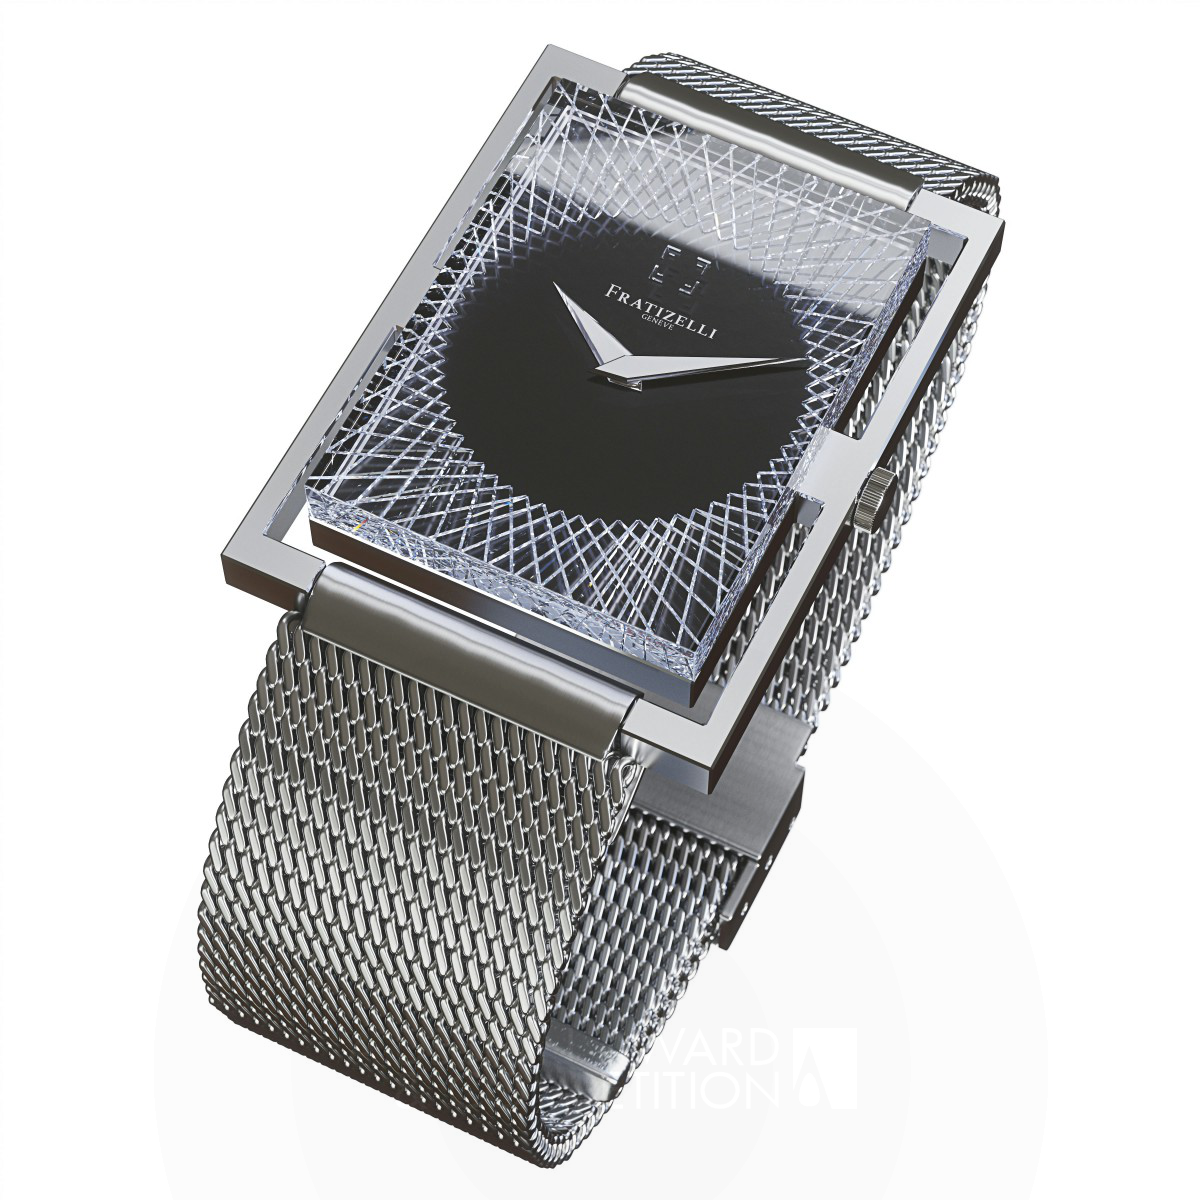 The Architect Watch by Tonis Leissoo